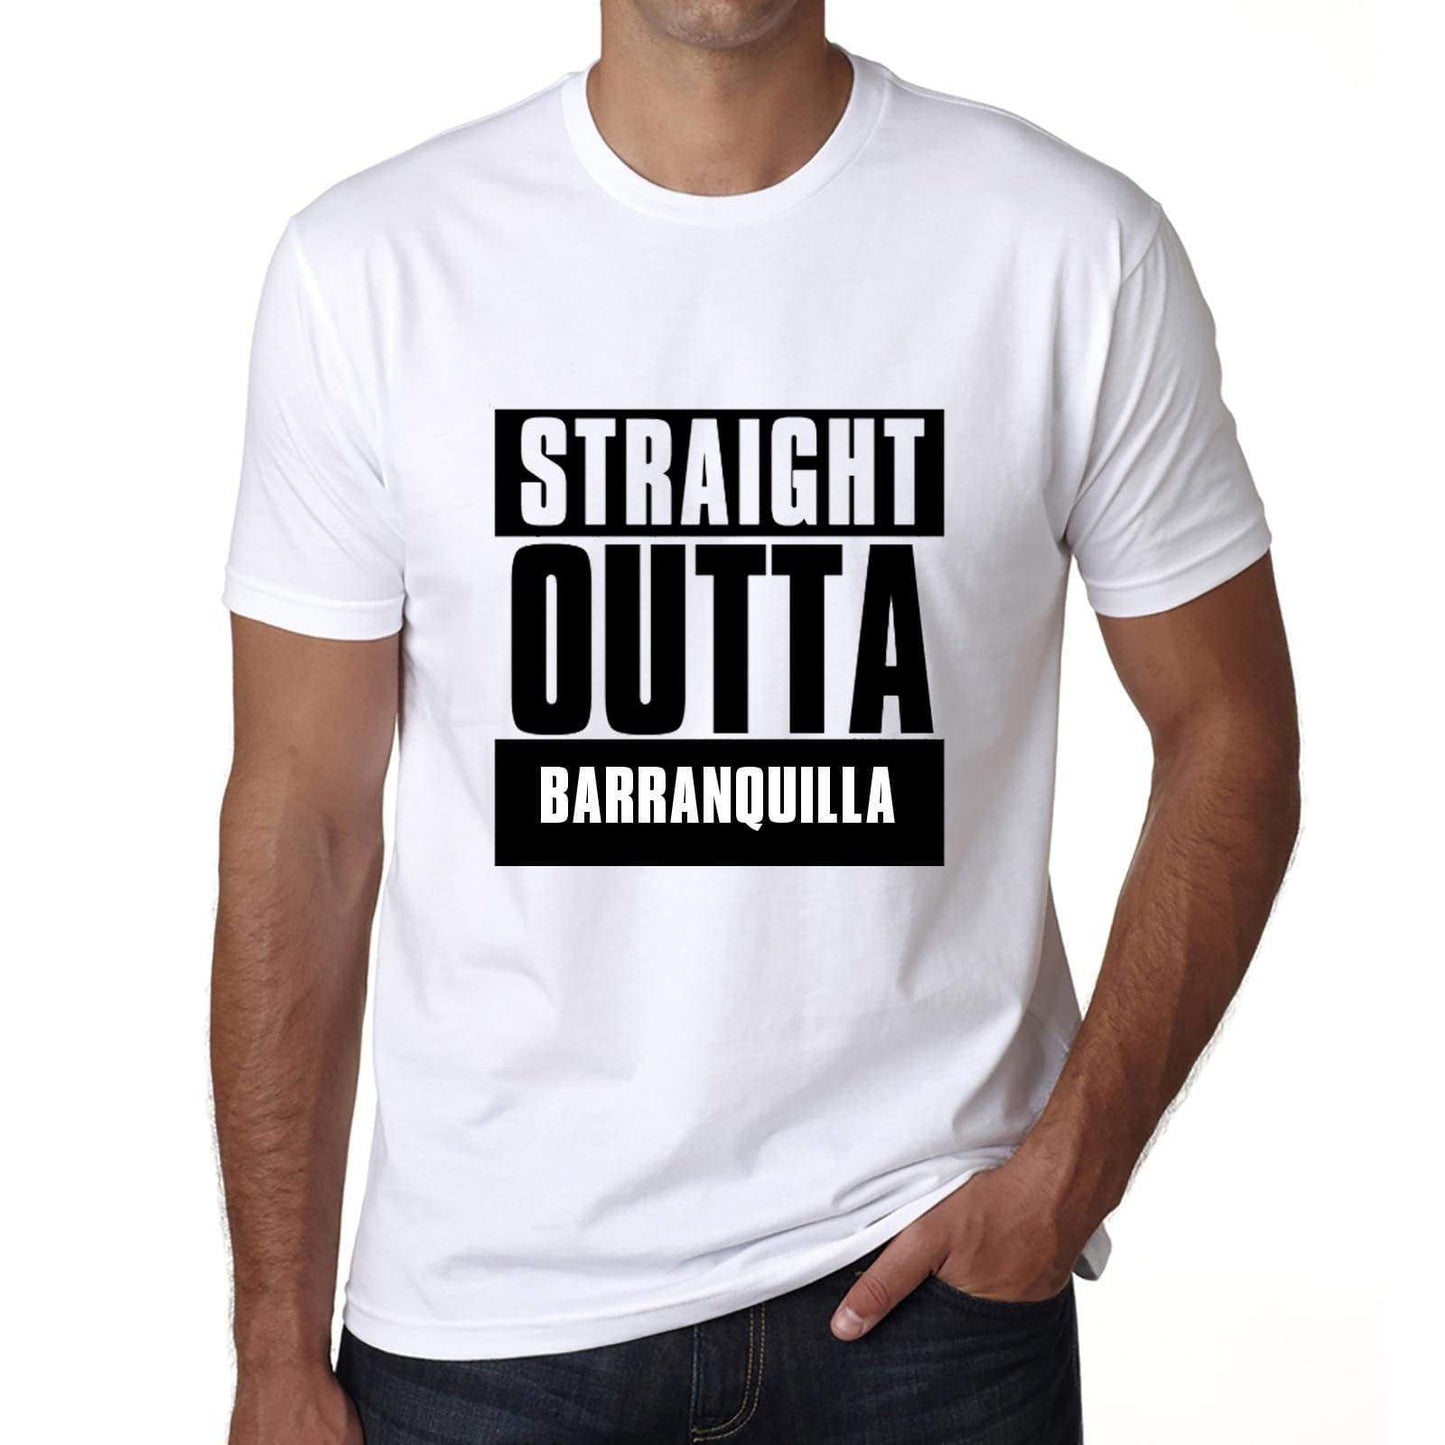 Straight Outta Barranquilla Mens Short Sleeve Round Neck T-Shirt 00027 - White / S - Casual